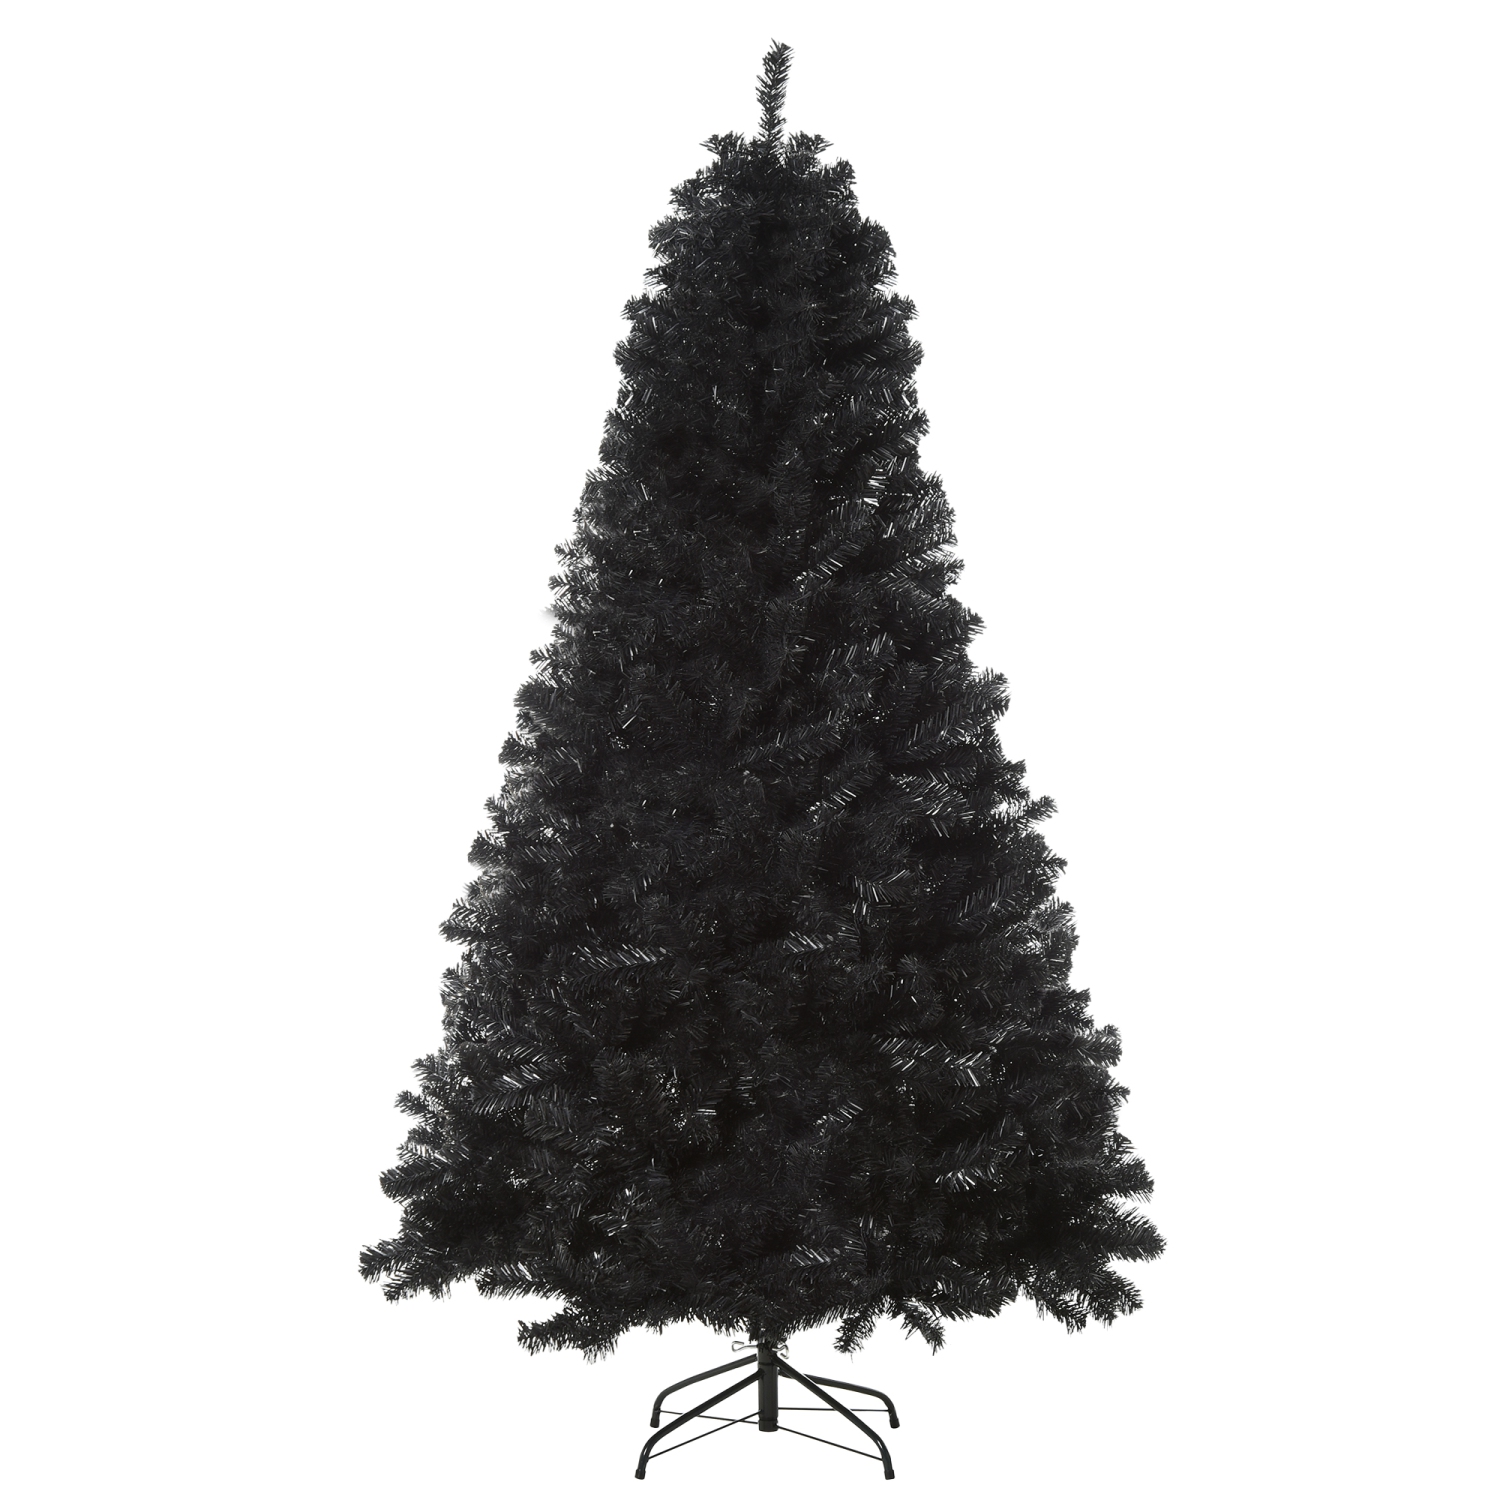 HOMCOM 6ft Artificial Christmas Tree Unlit Douglas Fir with Realistic Branch Tips, Black Halloween Style